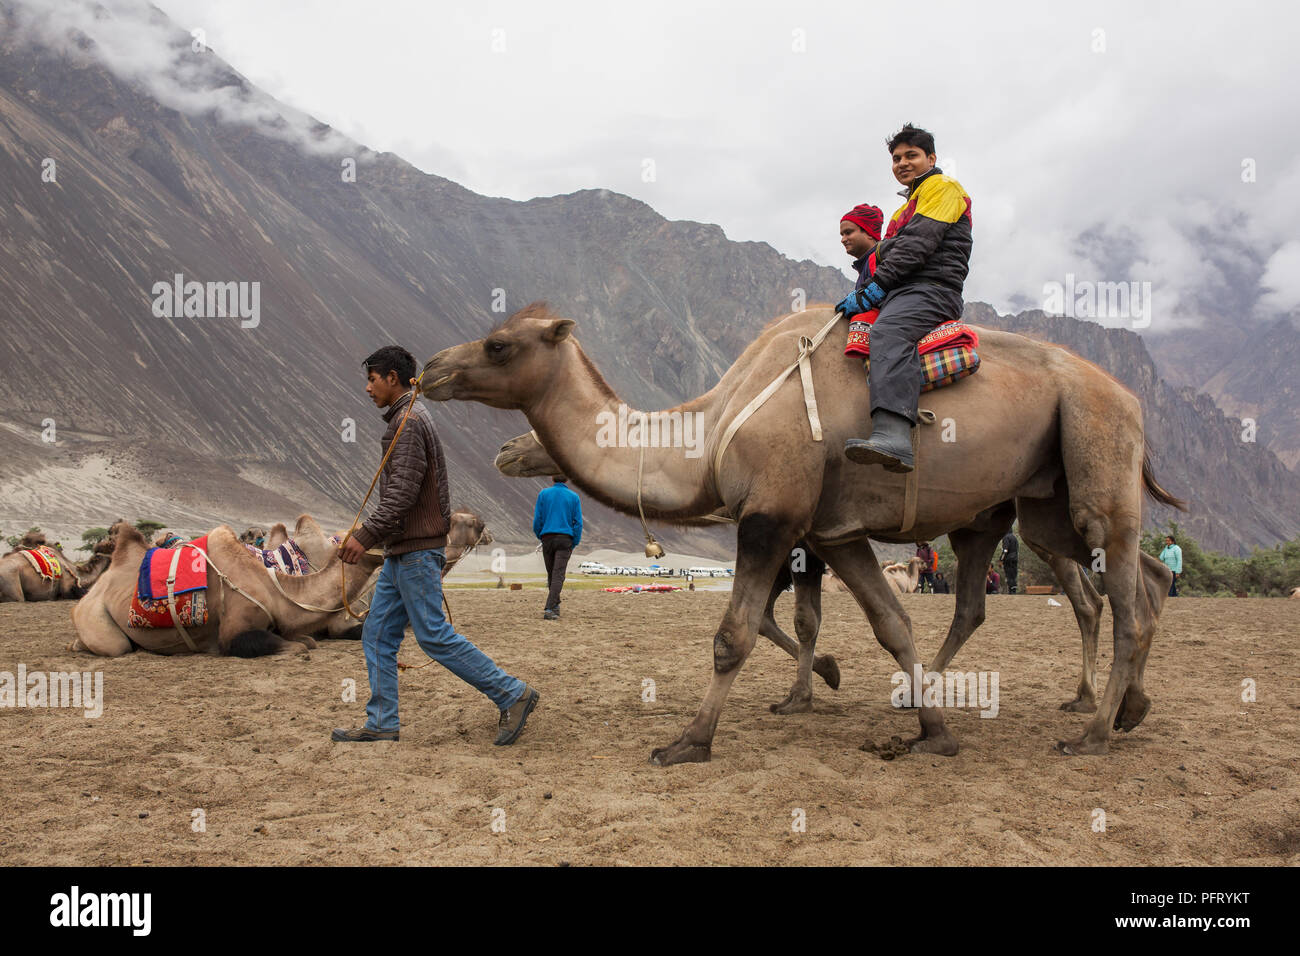 Ladakh, India - June 29, 2017: Unidentified Indian tourists riding camels during safari in Nubra valley in Ladakh, India Stock Photo